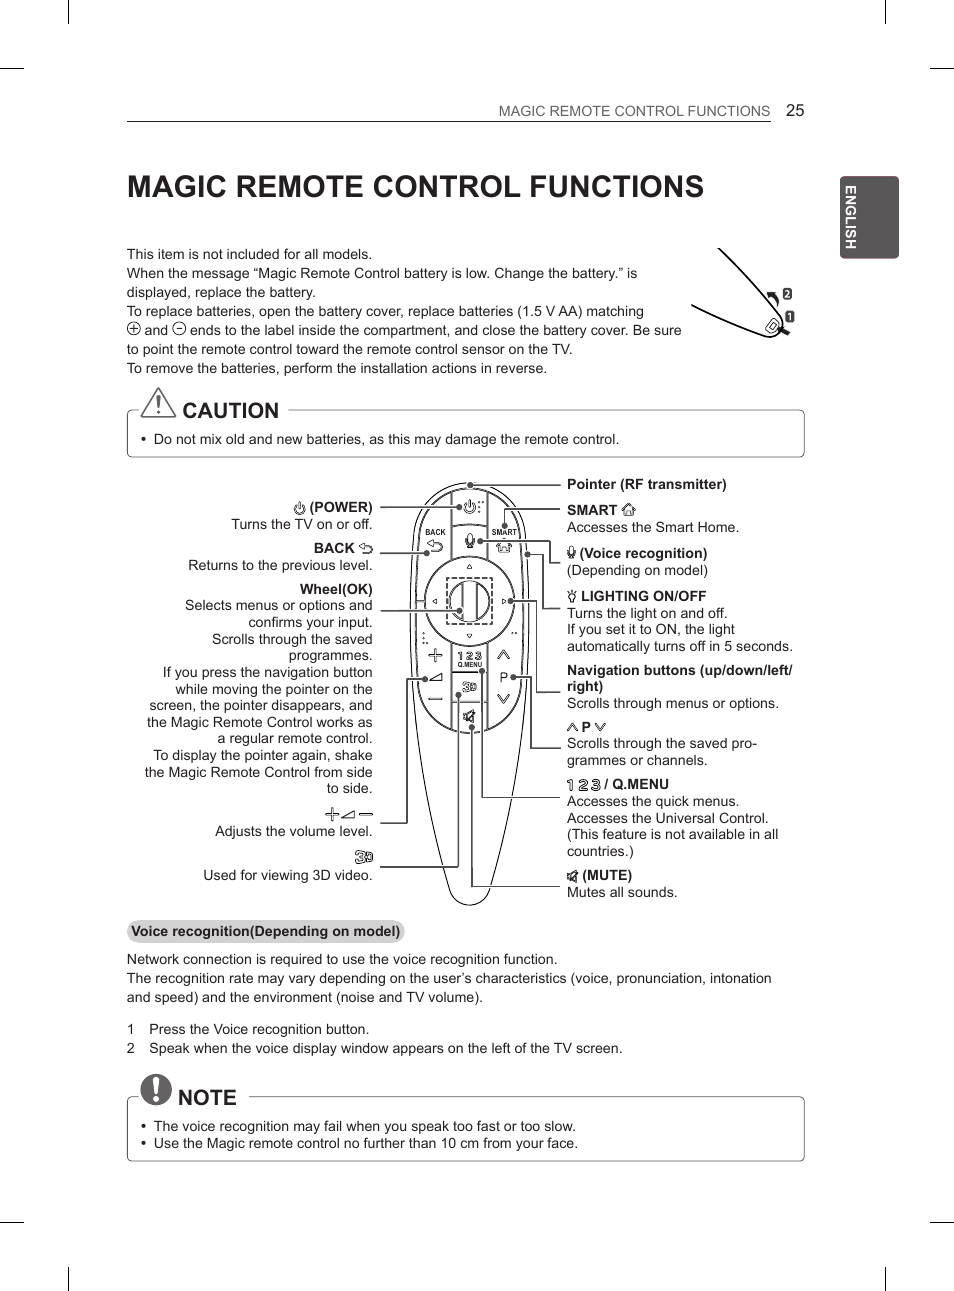 Magic remote control functions, Caution | LG 55EA970V User Manual | Page 81 / 544